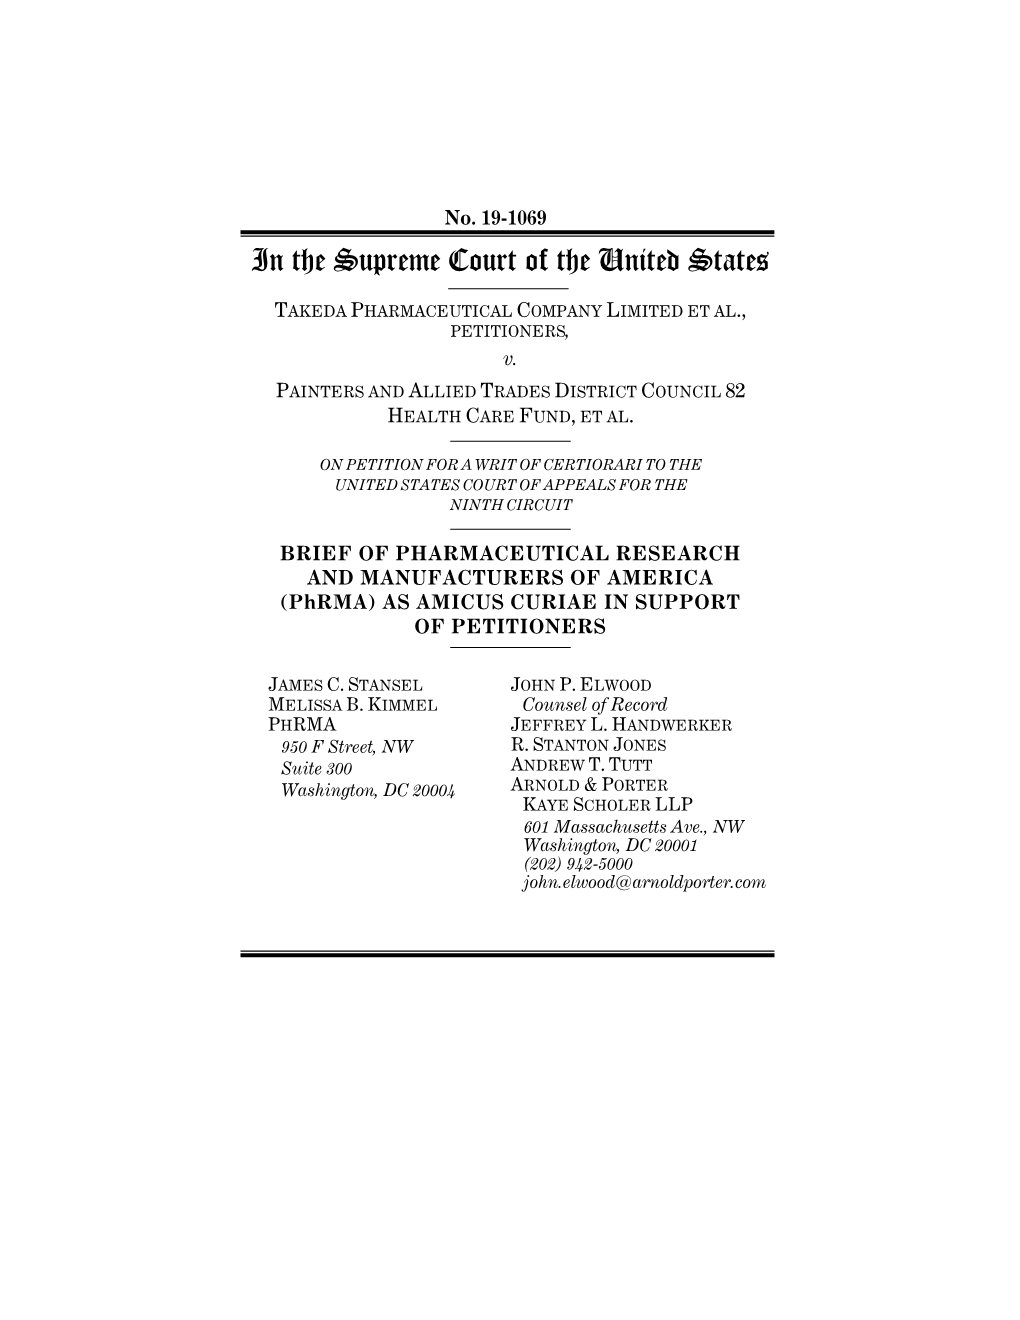 Phrma) AS AMICUS CURIAE in SUPPORT of PETITIONERS